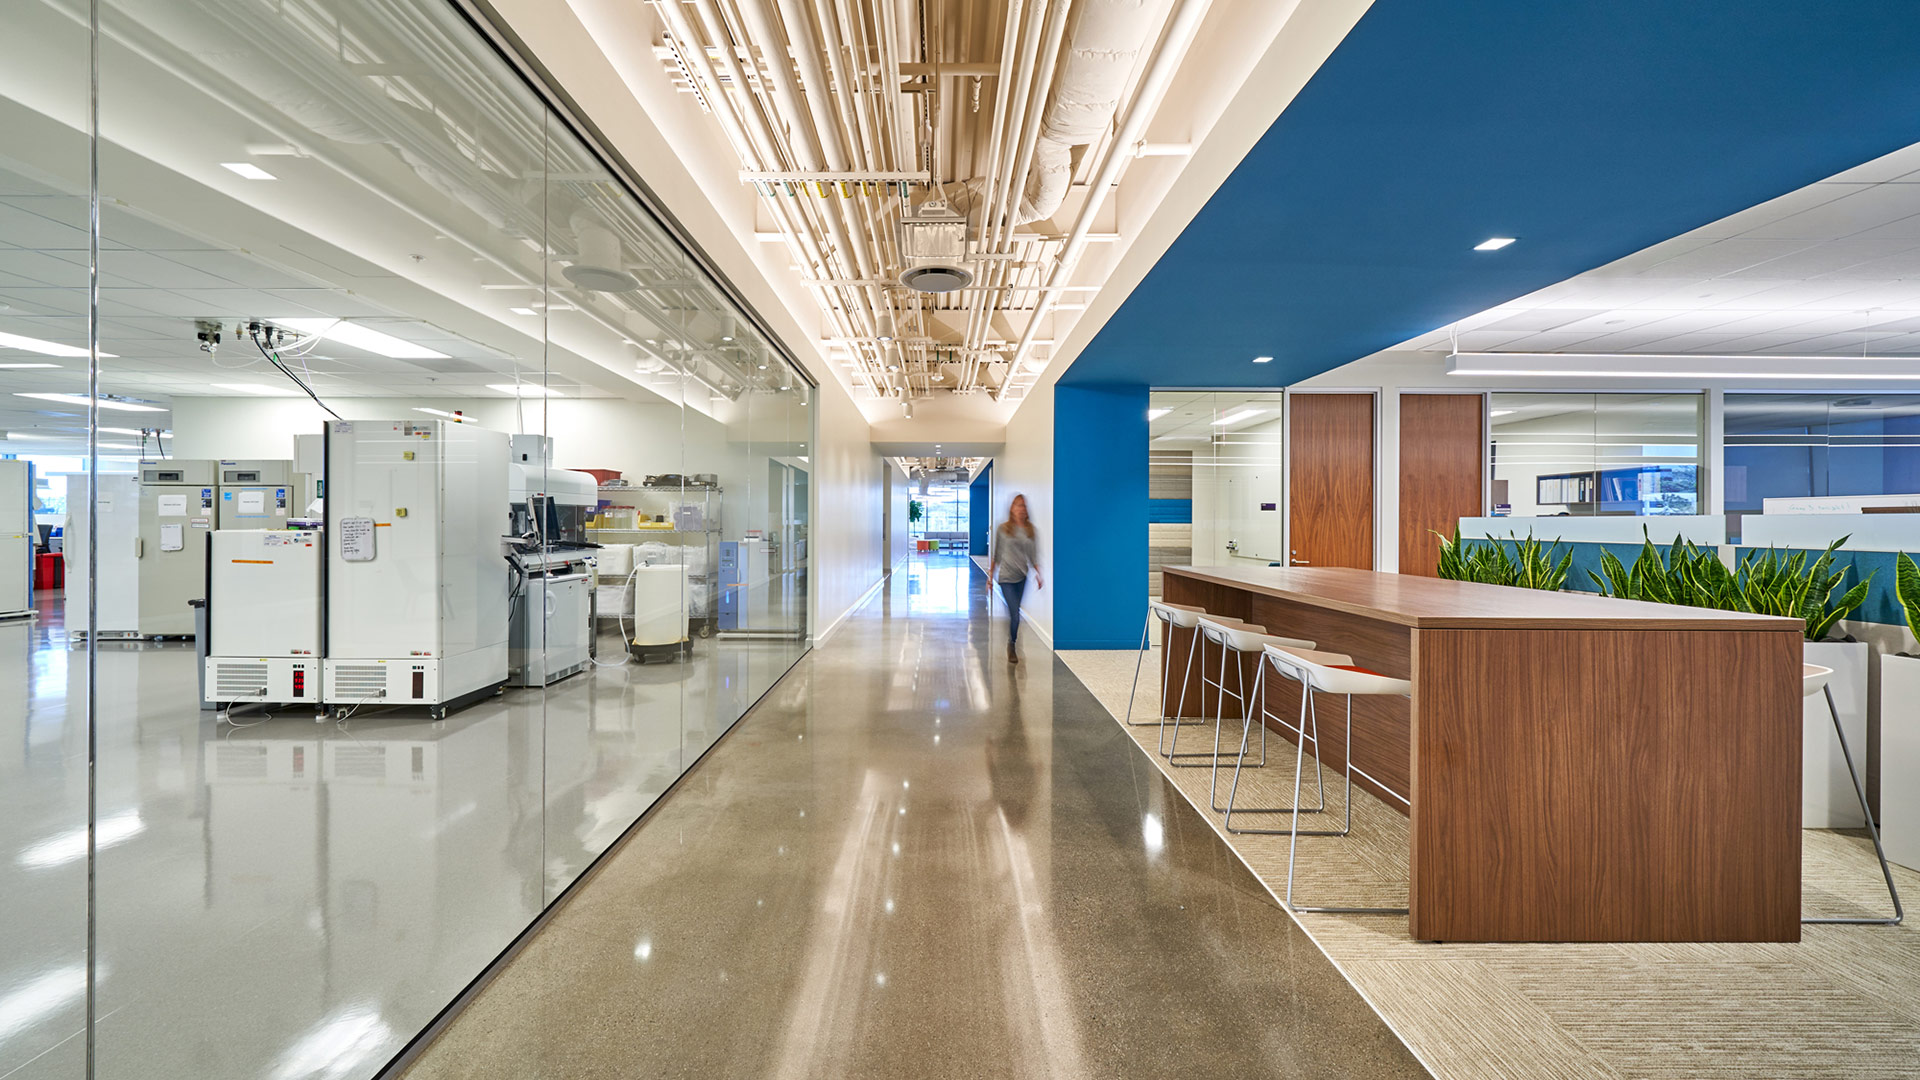 Interior at Vertex Pharmaceuticals life science facility, circulation with someone walking through, open office collaboration space and science on display view into lab